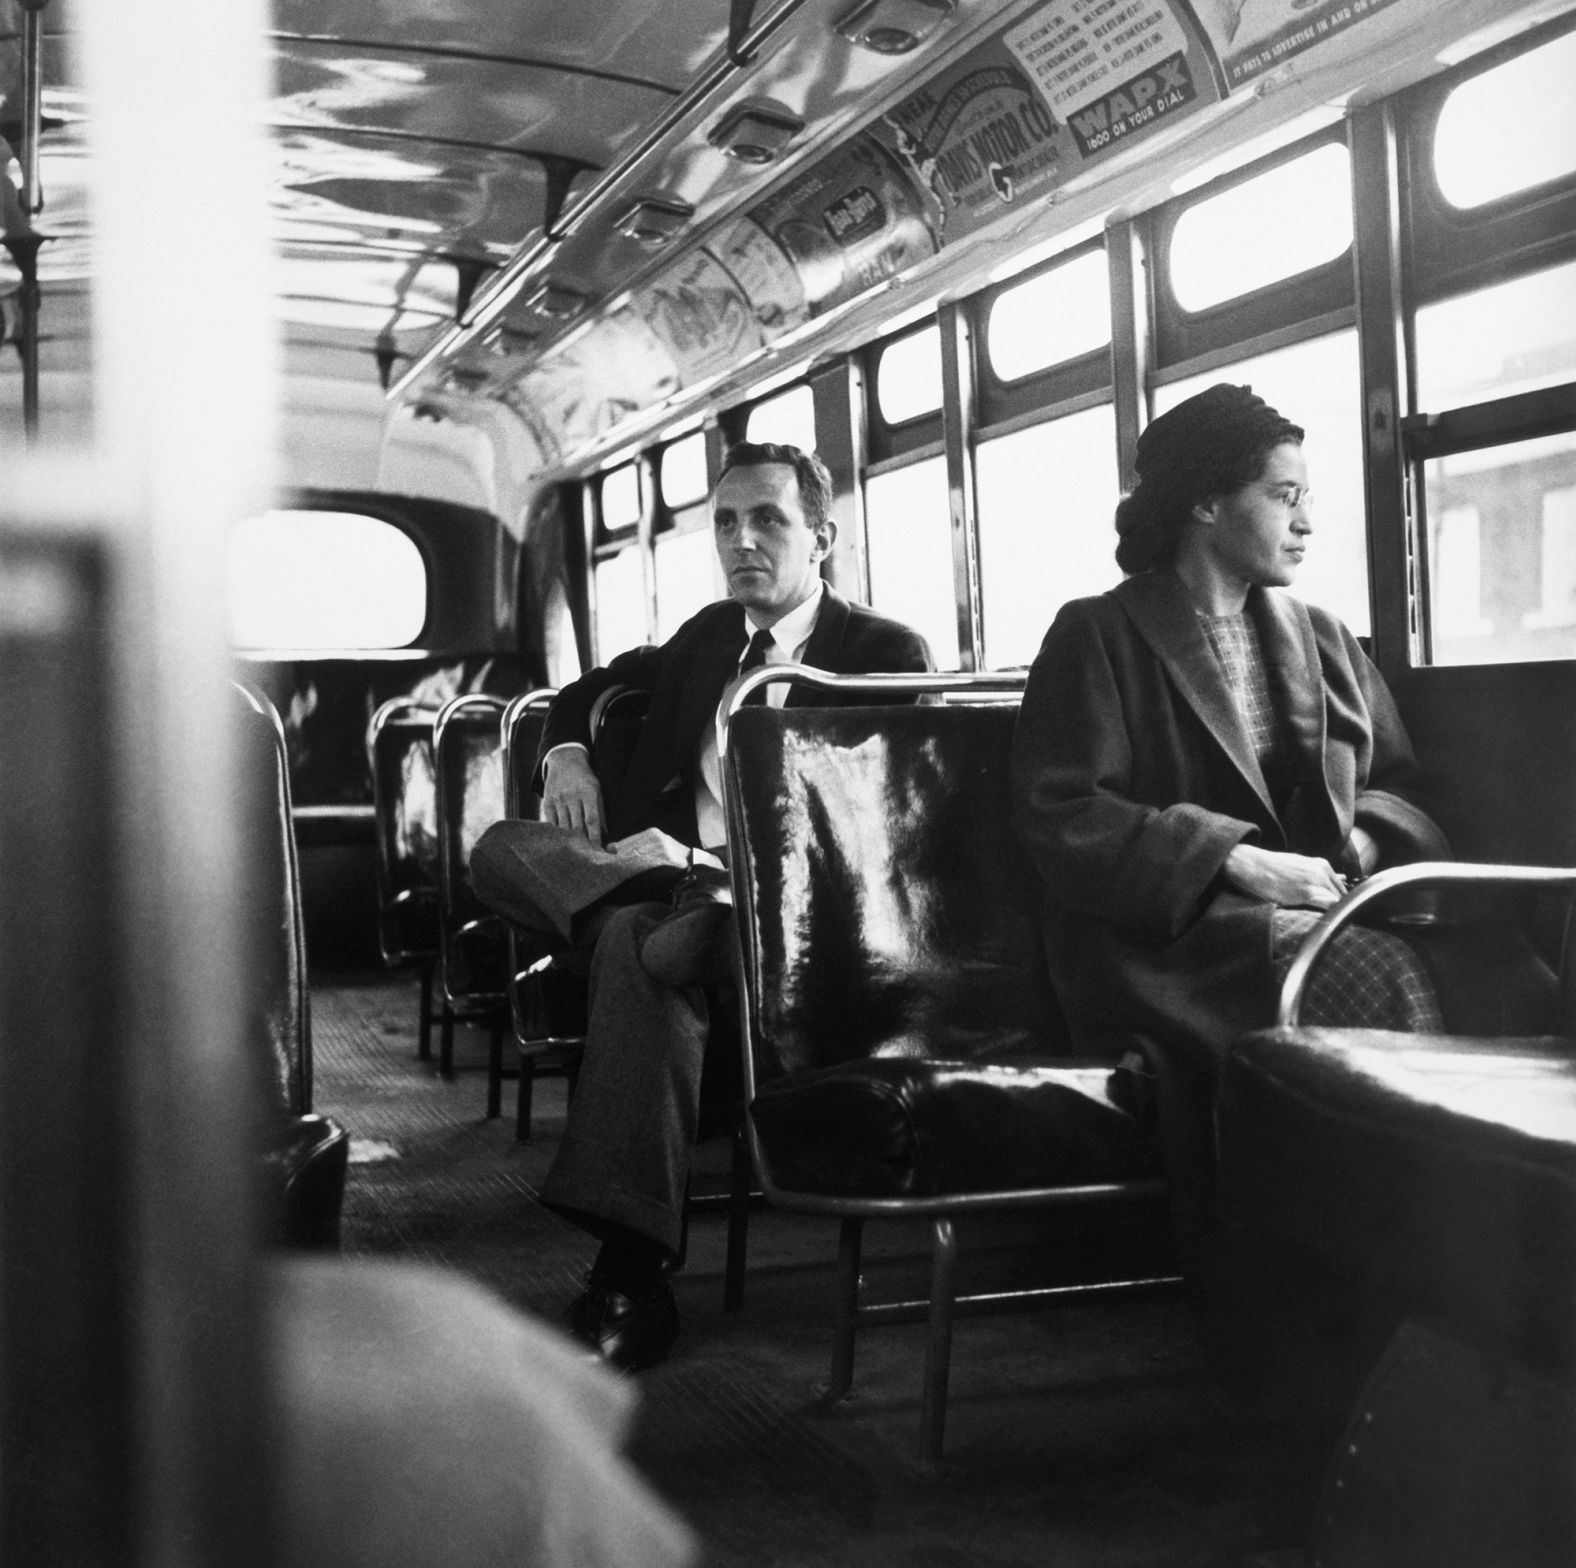 Rosa Parks became one of the biggest leaders of the civil rights movement after she was arrested for refusing to give up her bus seat for a White passenger in 1955. Parks' arrest was the spark Jo Ann Robinson and the Women's Political Council of Montgomery, Alabama, needed to set their plan of a bus boycott in motion. The Montgomery Bus Boycott lasted for 381 days and brought national attention to the issue of segregation.